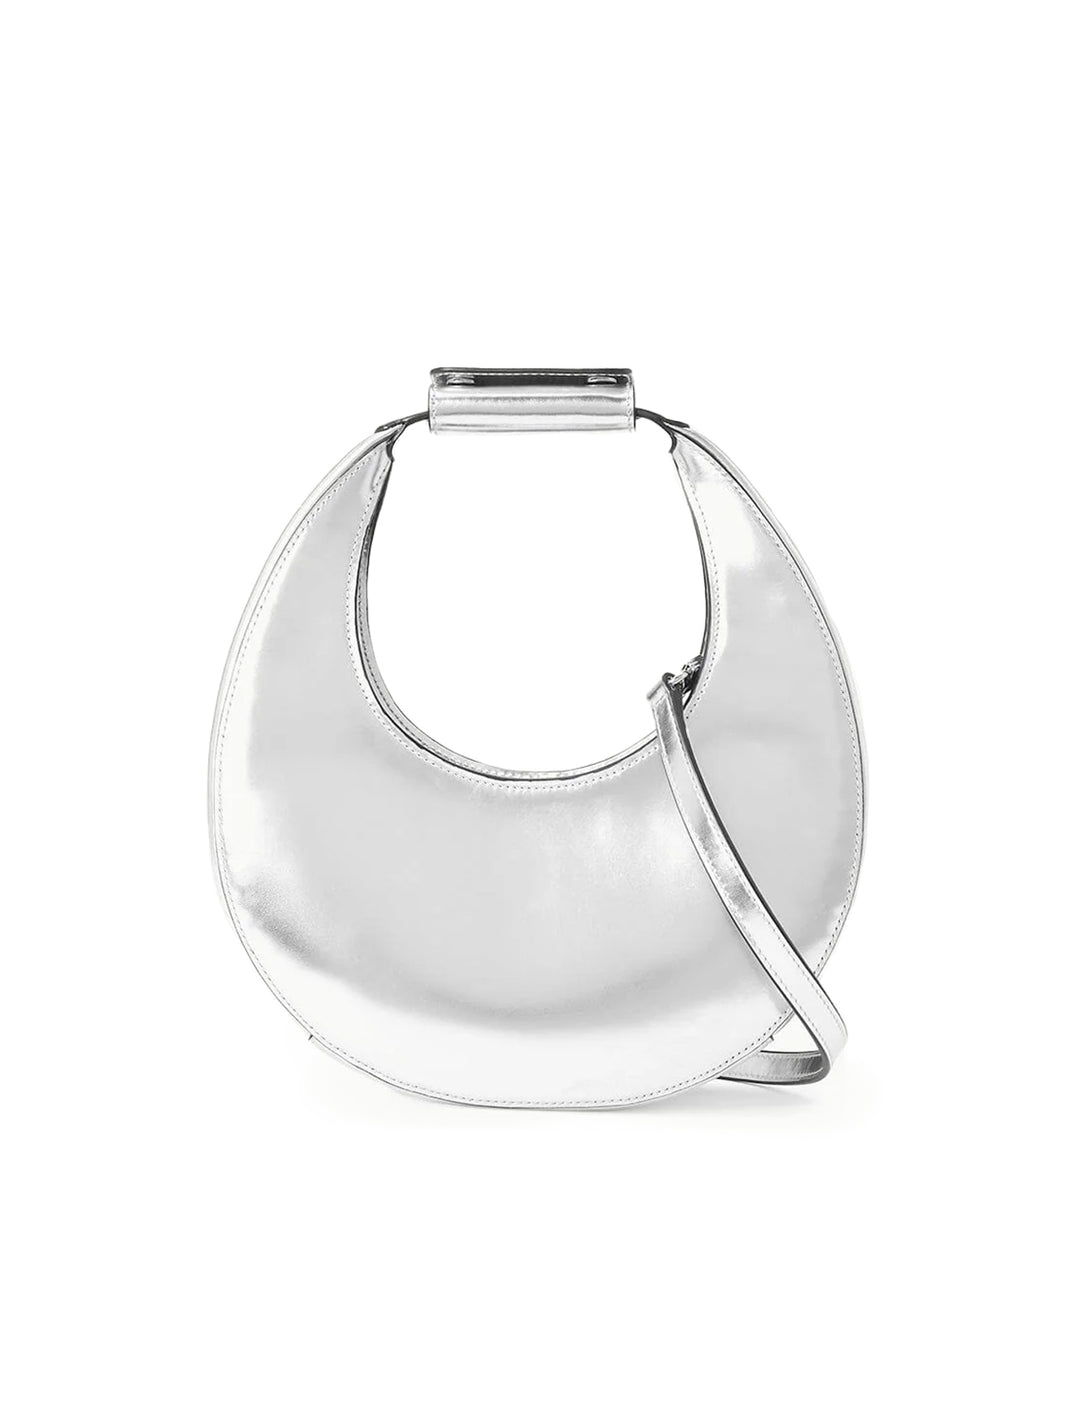 Front view of STAUD's mini moon bag in chrome.